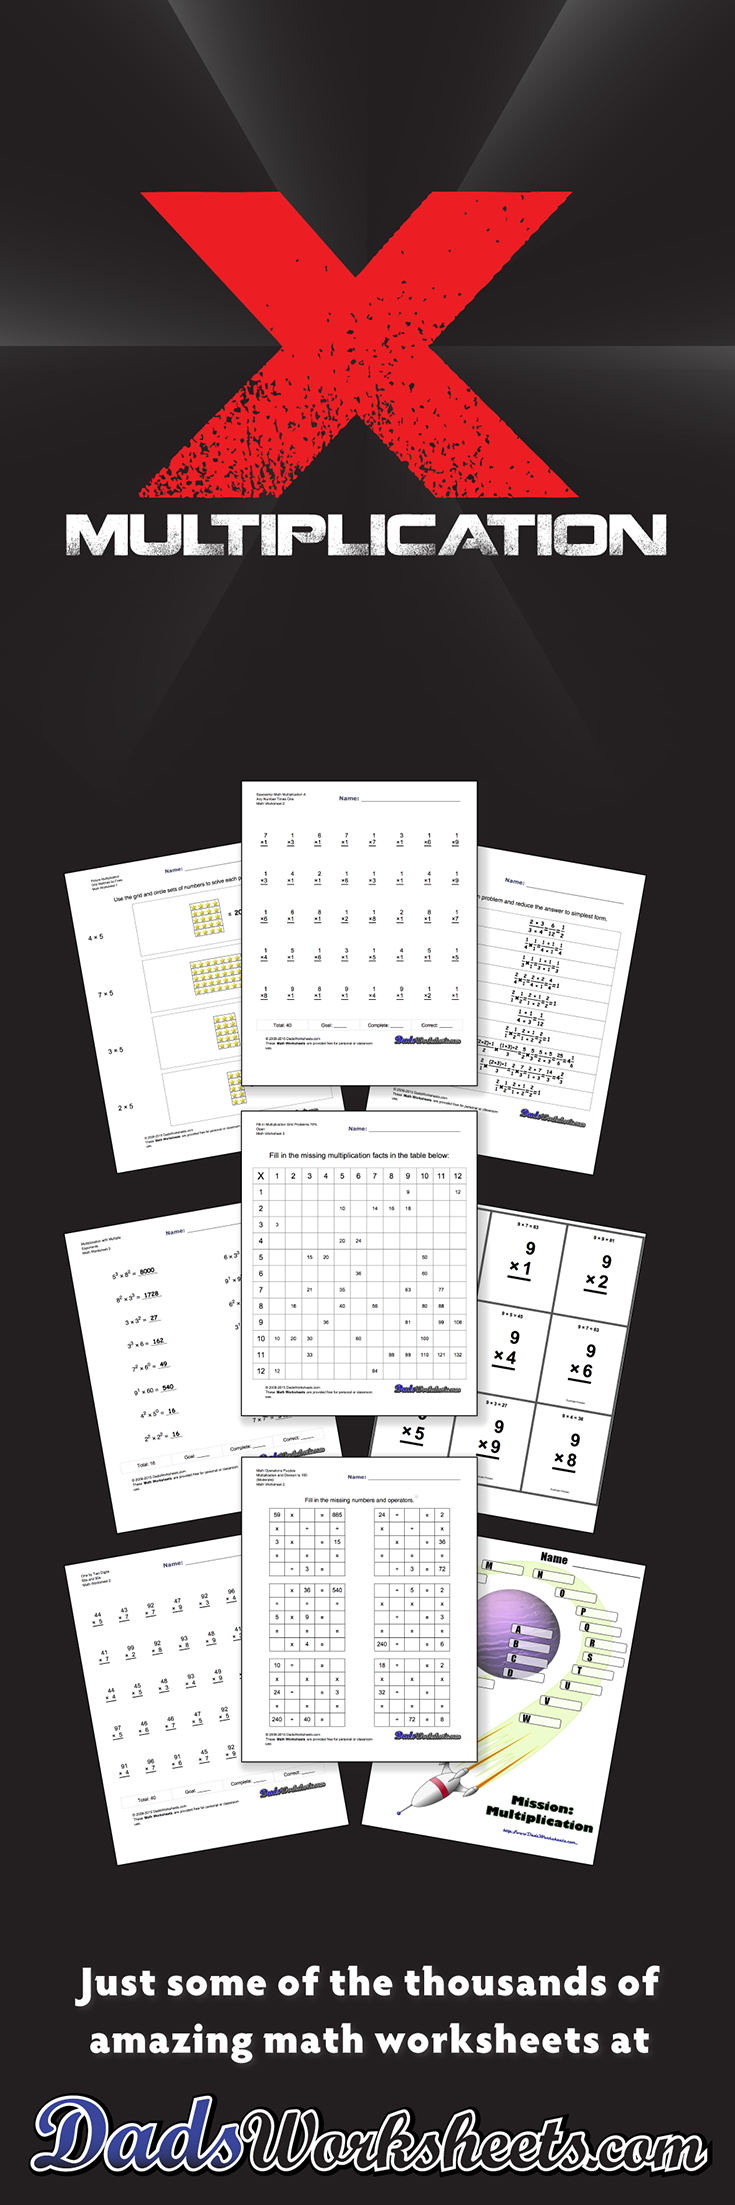 20 Minute Multiplication Challenge Worksheet 1000 Images About Multiplication Facts On